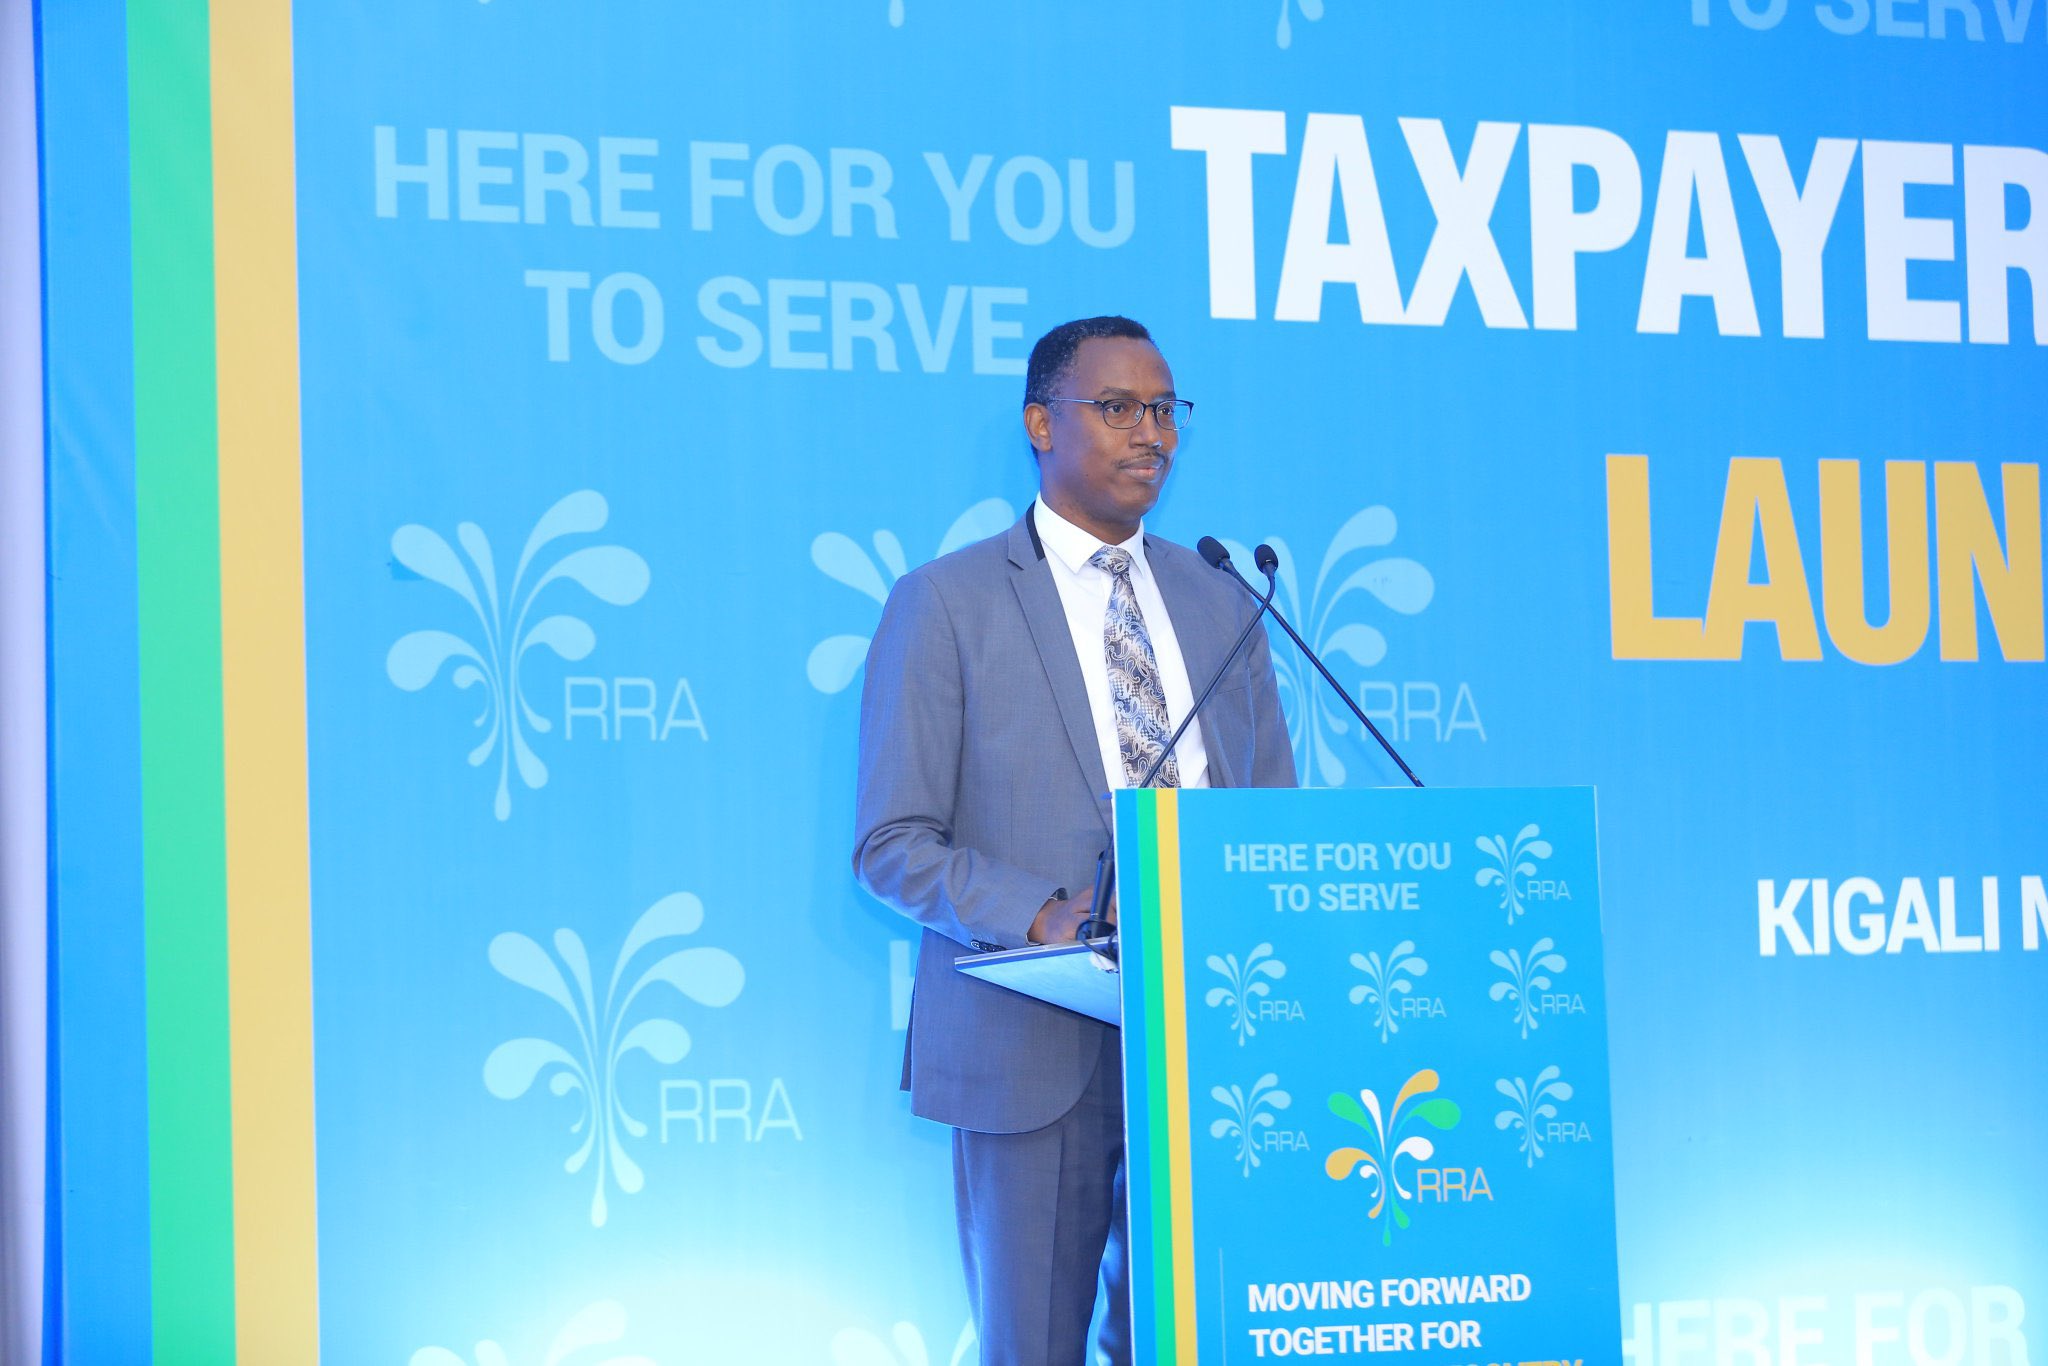 Rwanda is considering to start collecting Value Added Tax (VAT) on online services consumed within the country.